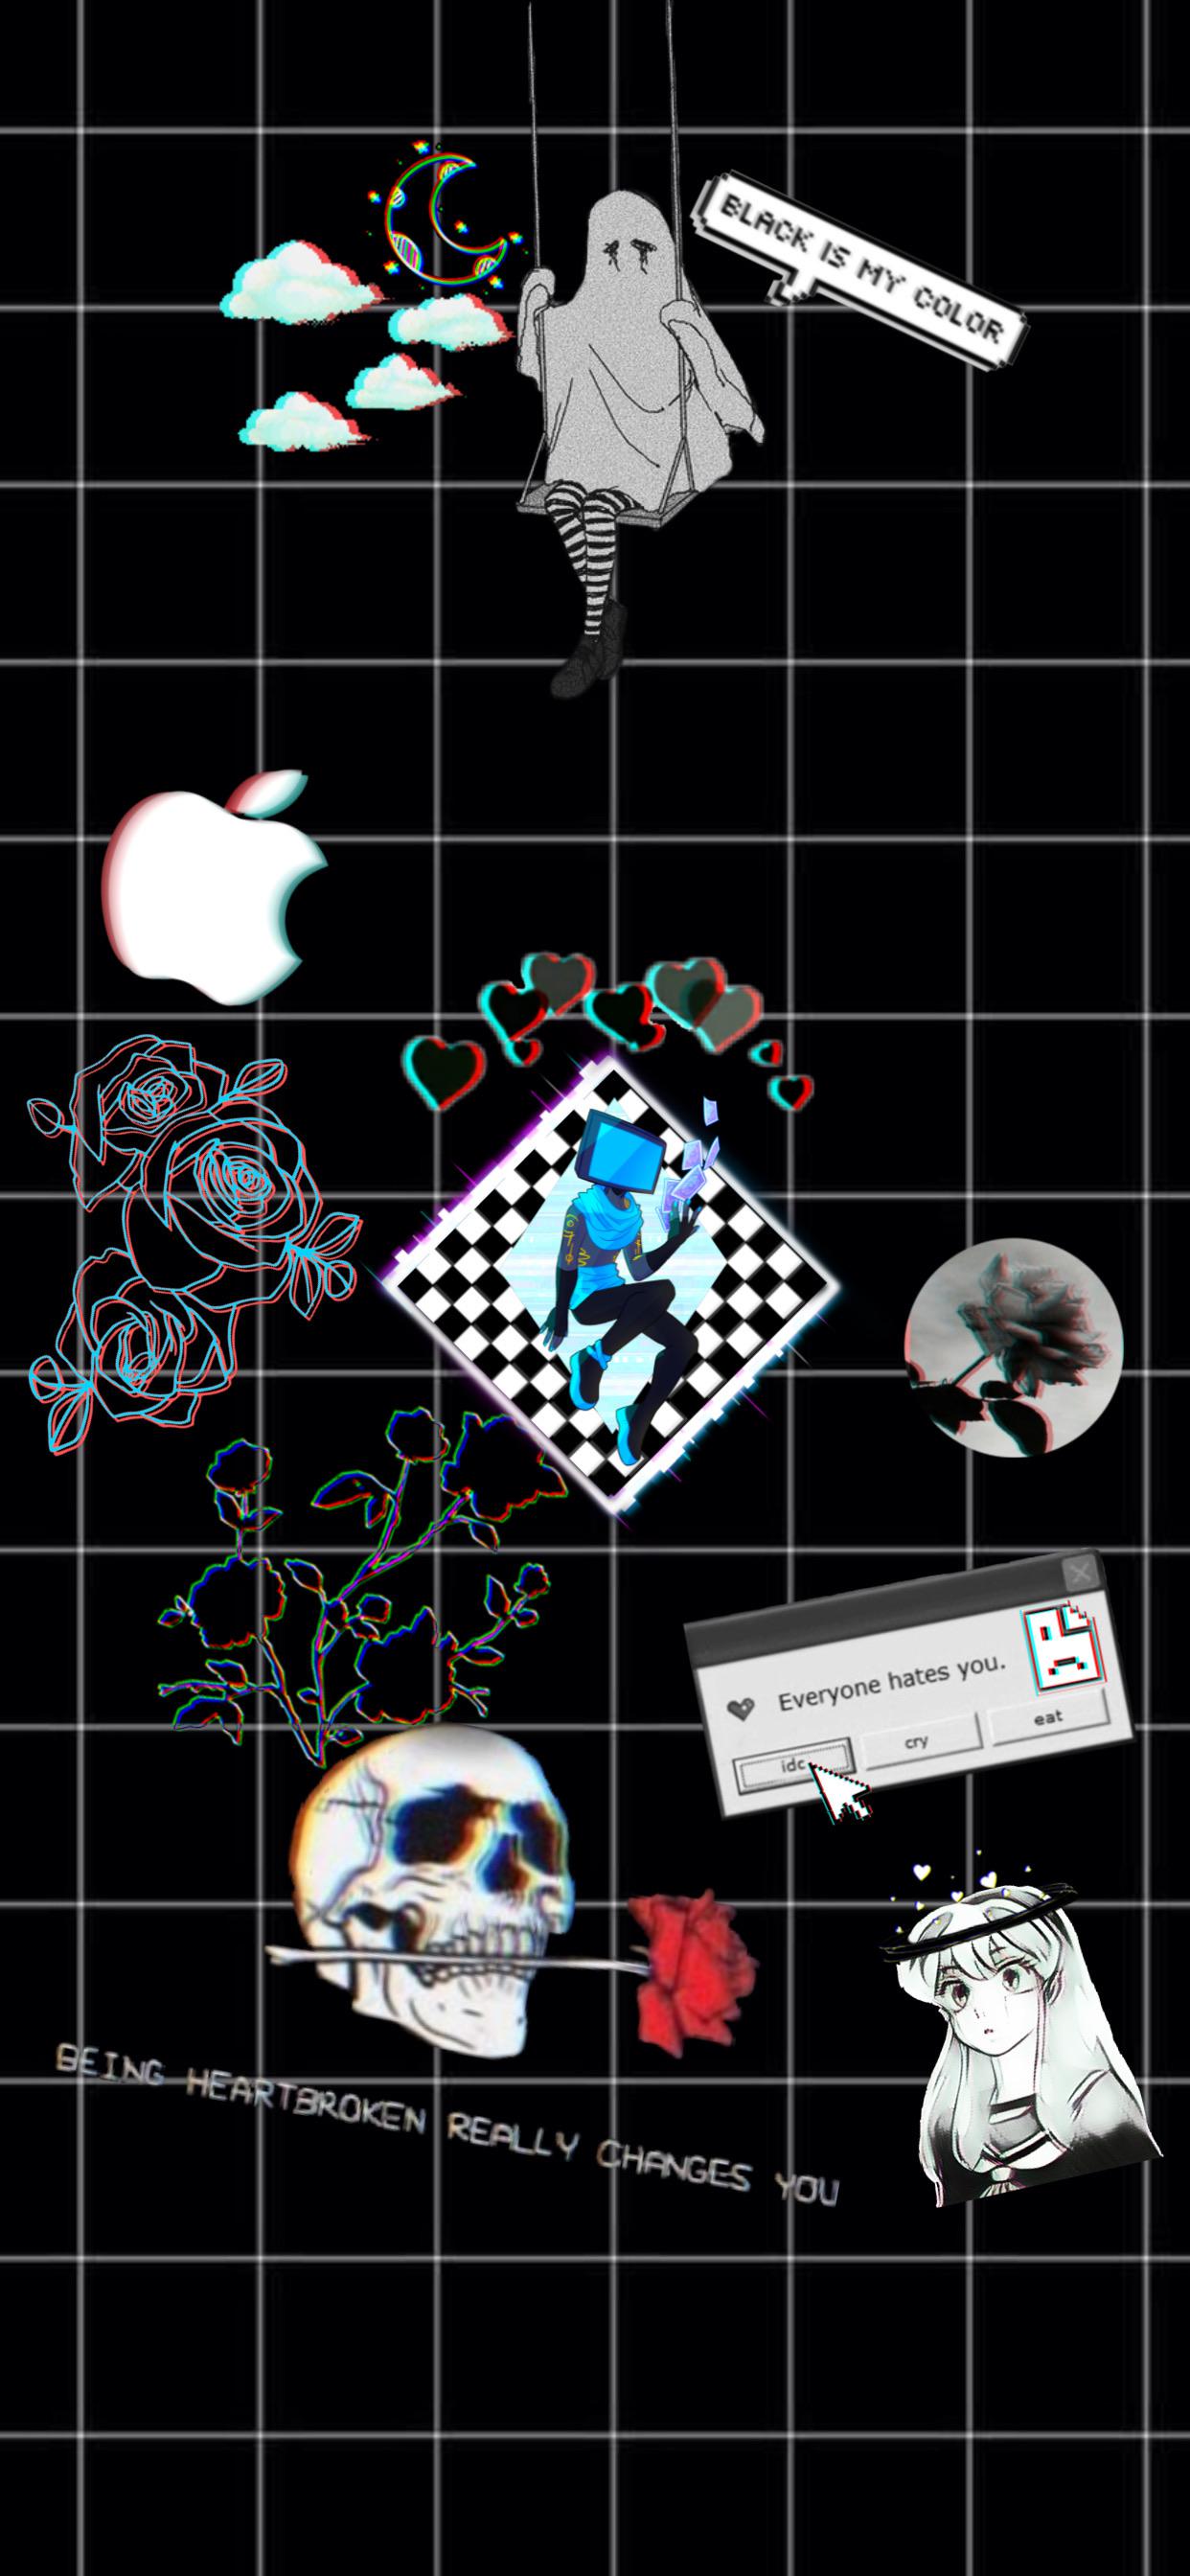 iPhone Xs Max aesthetic wallpaper, 2688 x 1242 pixels. Home Screen only lol